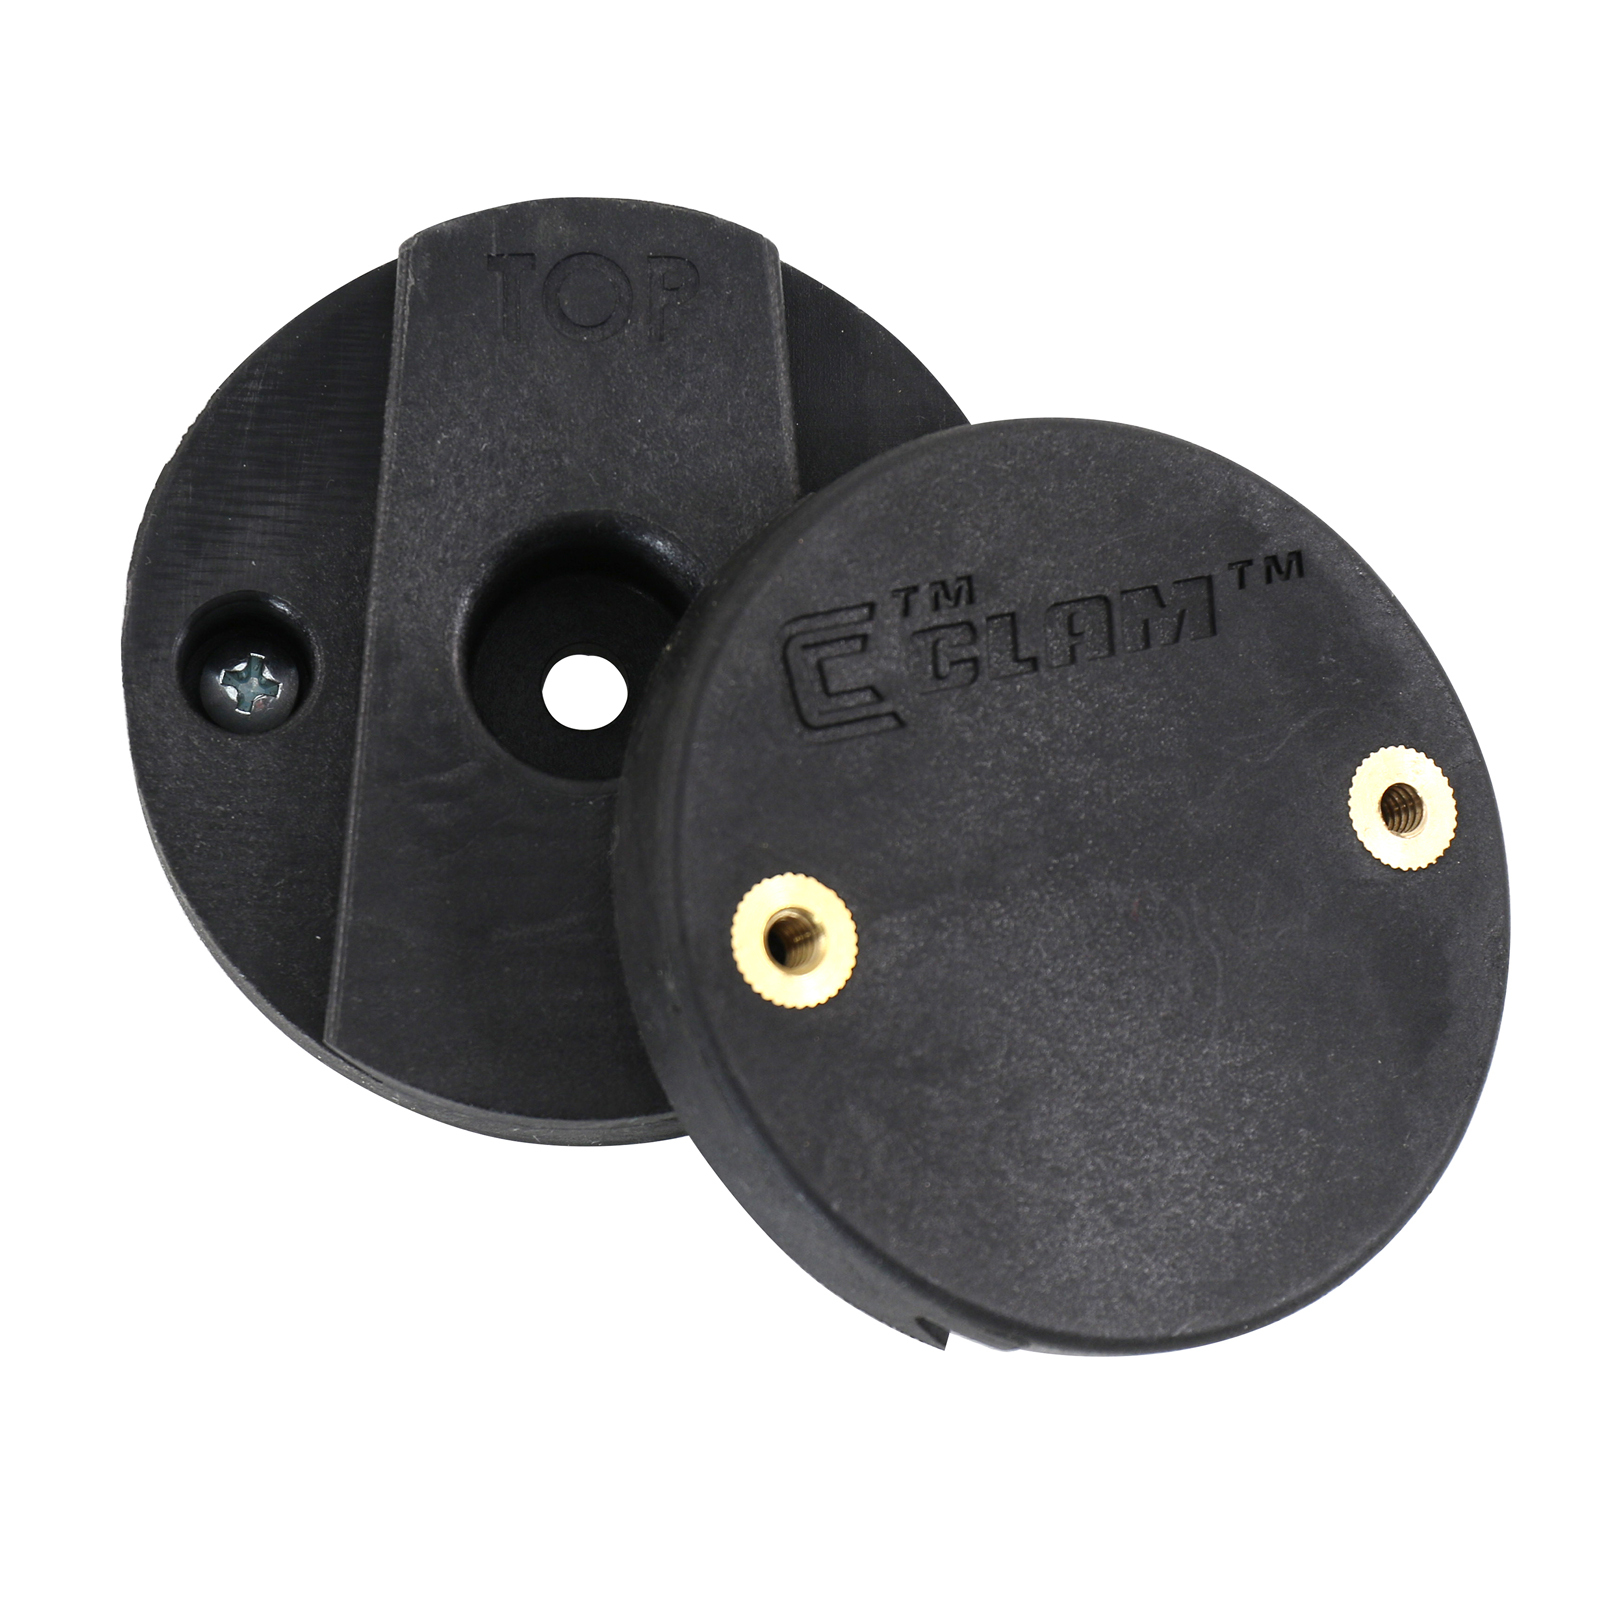 https://op2.0ps.us/original/opplanet-clam-lock-accessory-base-plate-m